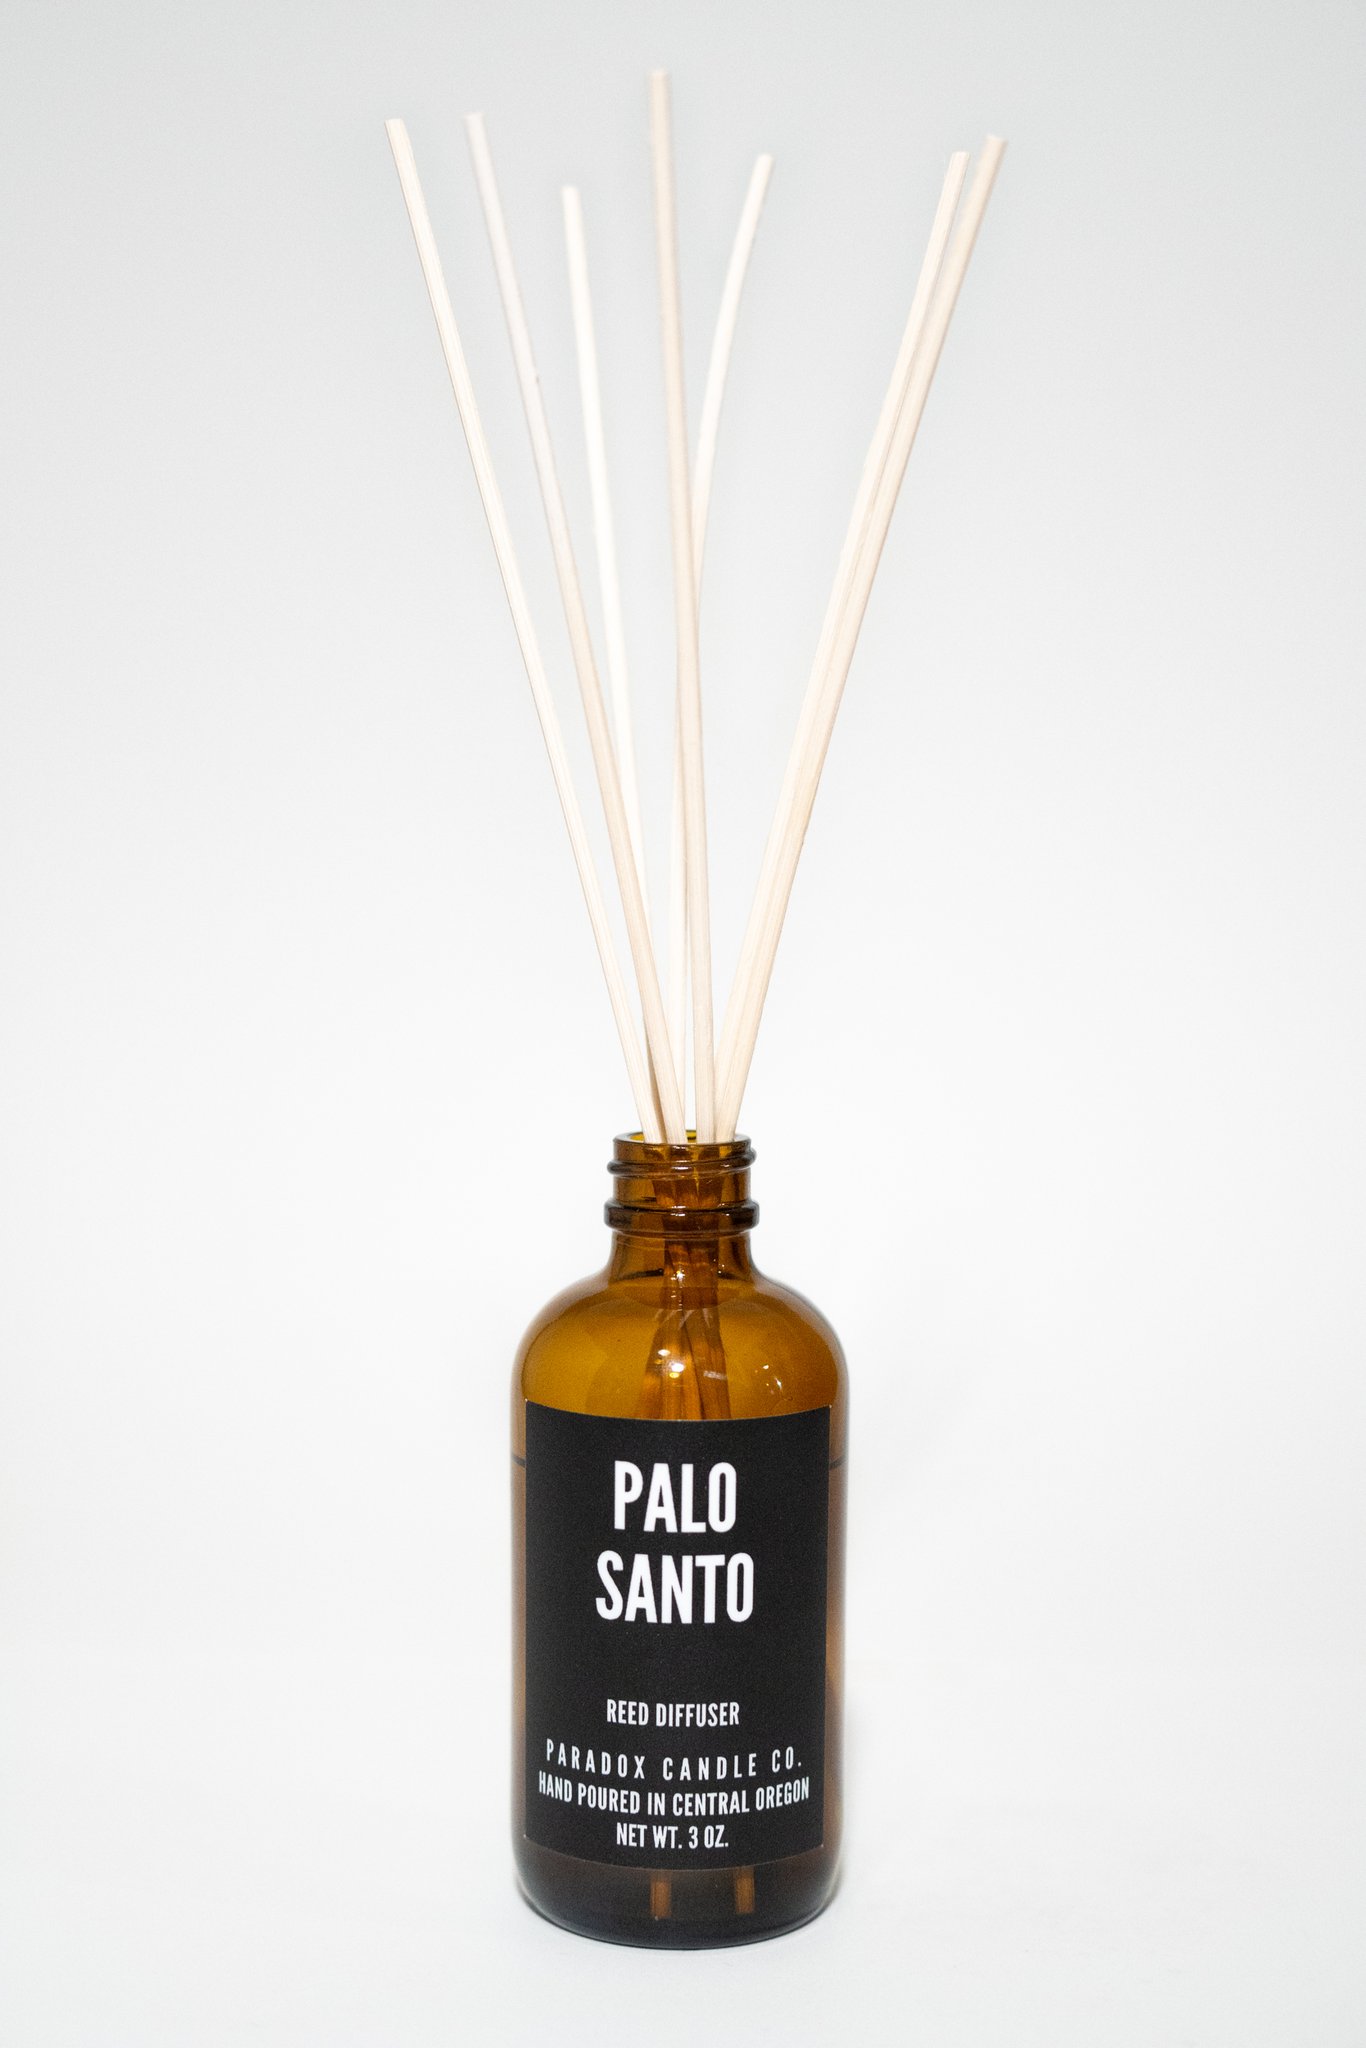 Paradox Candle Co. - Reed Diffusers - PALO SANTO